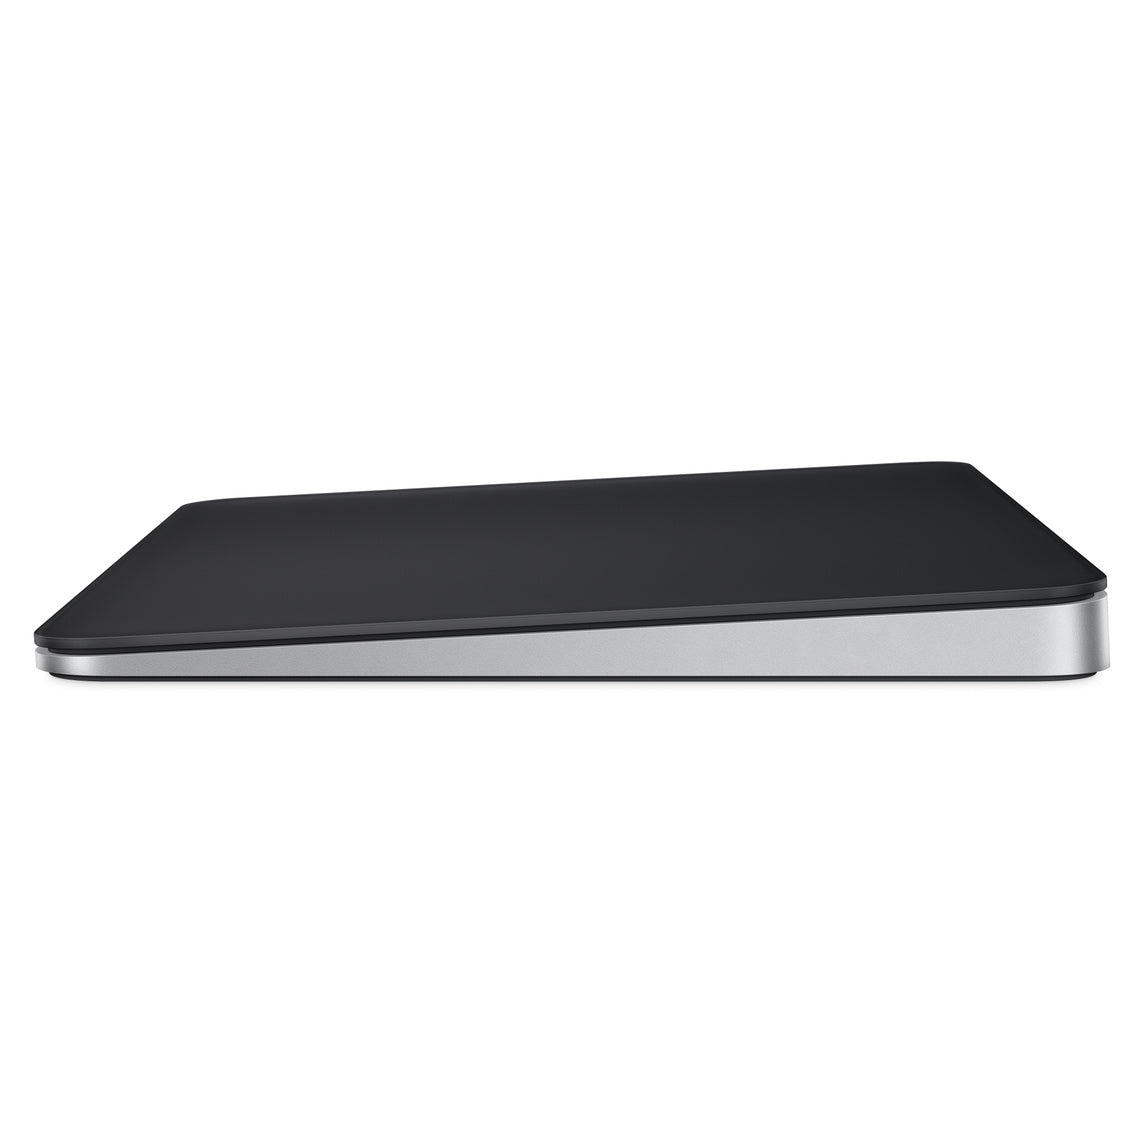 Apple Magic Trackpad - Black Multi-Touch Surface for Macbook & iMac